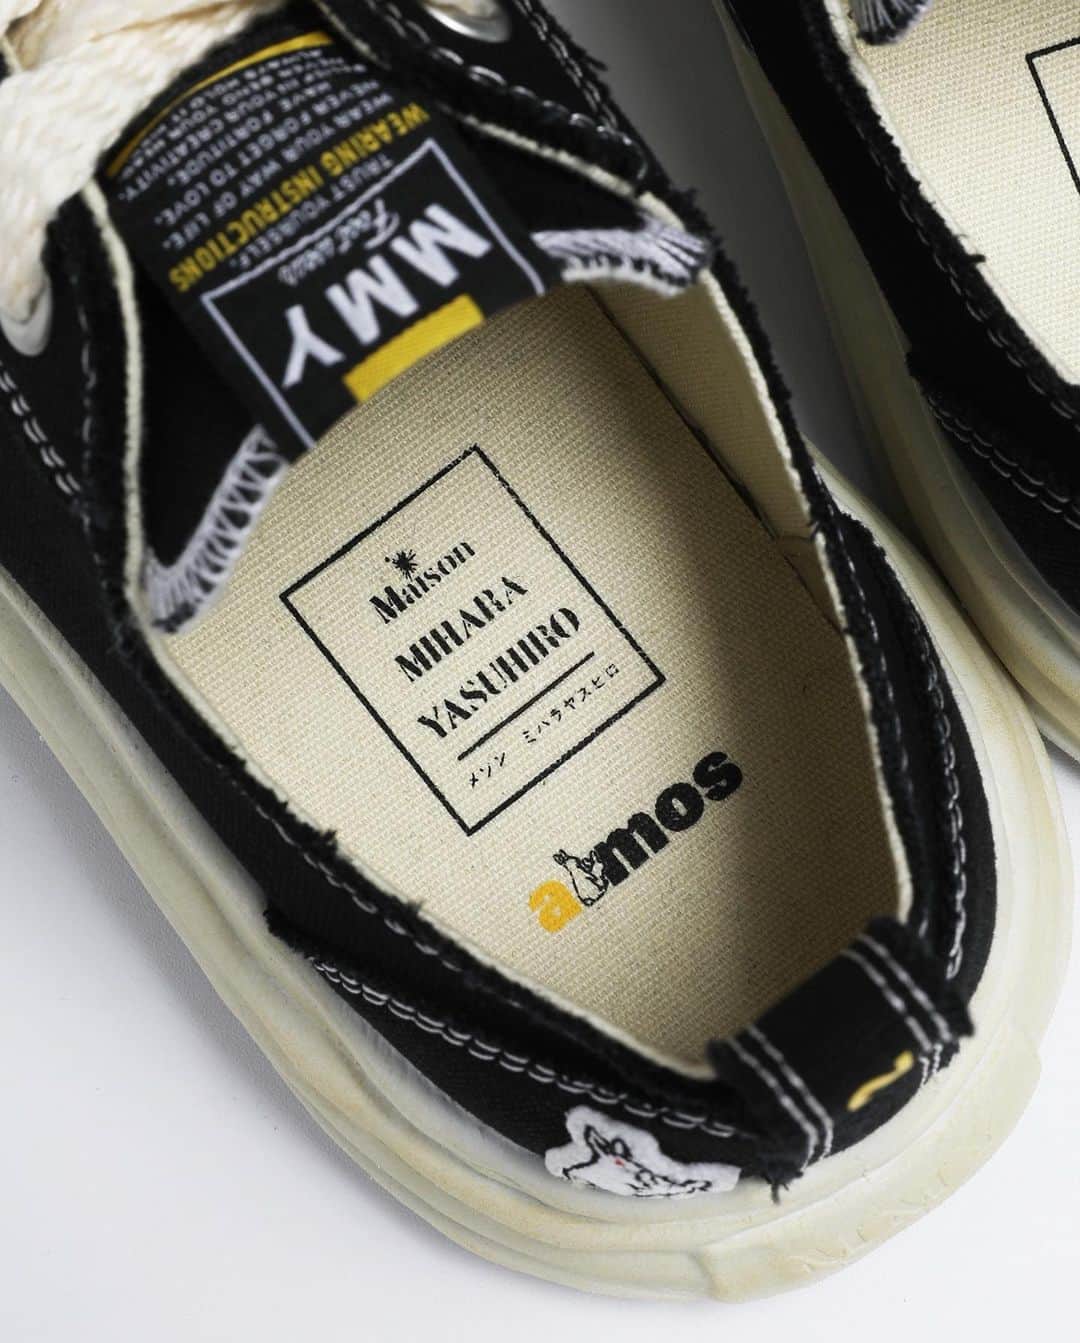 #FR2さんのインスタグラム写真 - (#FR2Instagram)「Maison MIHARA YASUHIRO × #FR2 × atmos PETERSON  "Atmos" a sneaker shop that continues to spread sneaker culture from Tokyo to the world, "Maison MIHARA YASHIRO", which started as a shoe brand in 1997, and a fictitious photographer-based fashion brand "#FR2" will collaborate.  "·This time based on the brand's original sneakers "PETERSON", and the logo of #FR2 icon Rabbit and "Smoking Kills" has been added in the sneaker. A premium pair with a vintage-like feel.The special logo on the insole and other details are unique to collaboration between Japanese brands. . @miharayasuhiro_official @fxxkingrabbits @atmos_japan .  . Maison MIHARA YASUHIRO × #FR2 × atmos PETERSON . 東京から世界へスニーカーカルチャーを発信し続けるスニーカーショップ「atmos」と、1997年にシューズブランドとしてスタートした「Maison MIHARA YASUHIRO」、そして架空のカメラマンがコンセプトのファッションブランド「#FR2」による夢のコラボレーションが実現。  今作はブランドオリジナルのスニーカー”PETERSON”をベースに#FR2 のアイコンRabbitと”Smoking Kills”のロゴを落とし込み、ヴィンテージライクな風合いに仕上げたプレミアムな一足。インソールに施したスペシャルロゴなど、細部に宿ったこだわりは日本ブランド同士のコラボならでは。 .  从东京不断向世界传播运动鞋文化的运动鞋店"atmos"和1997年以皮鞋品牌起步的"Maison MIHARAY ASUHIRO"，还有以虚构摄影师为概念的时尚品牌" #FR2 "实现了梦想的合作。 本作品以品牌经典运动鞋"PETERSON"为基础，搭配#FR2 的图标Rabbit和"Smoking Kills"标志，打造复古风格的高端一双。对Insourt的特别商标等细节的执着是日本品牌之间的合作。  從東京不斷向世界傳播運動鞋文化的運動鞋店"atmos"和1997年以皮鞋品牌起步的"Maison MIHARAY ASUHIRO"，還有以虛構攝影師爲概念的時尚品牌" #FR2 "實現了夢想的合作。 本作品以品牌經典運動鞋"PETERSON"爲基礎，搭配#FR2 的圖標Rabbit和"Smoking Kills"標誌，打造復古風格的高端一雙。對Insourt的特別商標等細節的執着是日本品牌之間的合作。  .  #maisonmiharayasuhiro#miharayasuhiro #fr2#fxxkingrabbits#atmos」10月12日 20時35分 - fxxkingrabbits